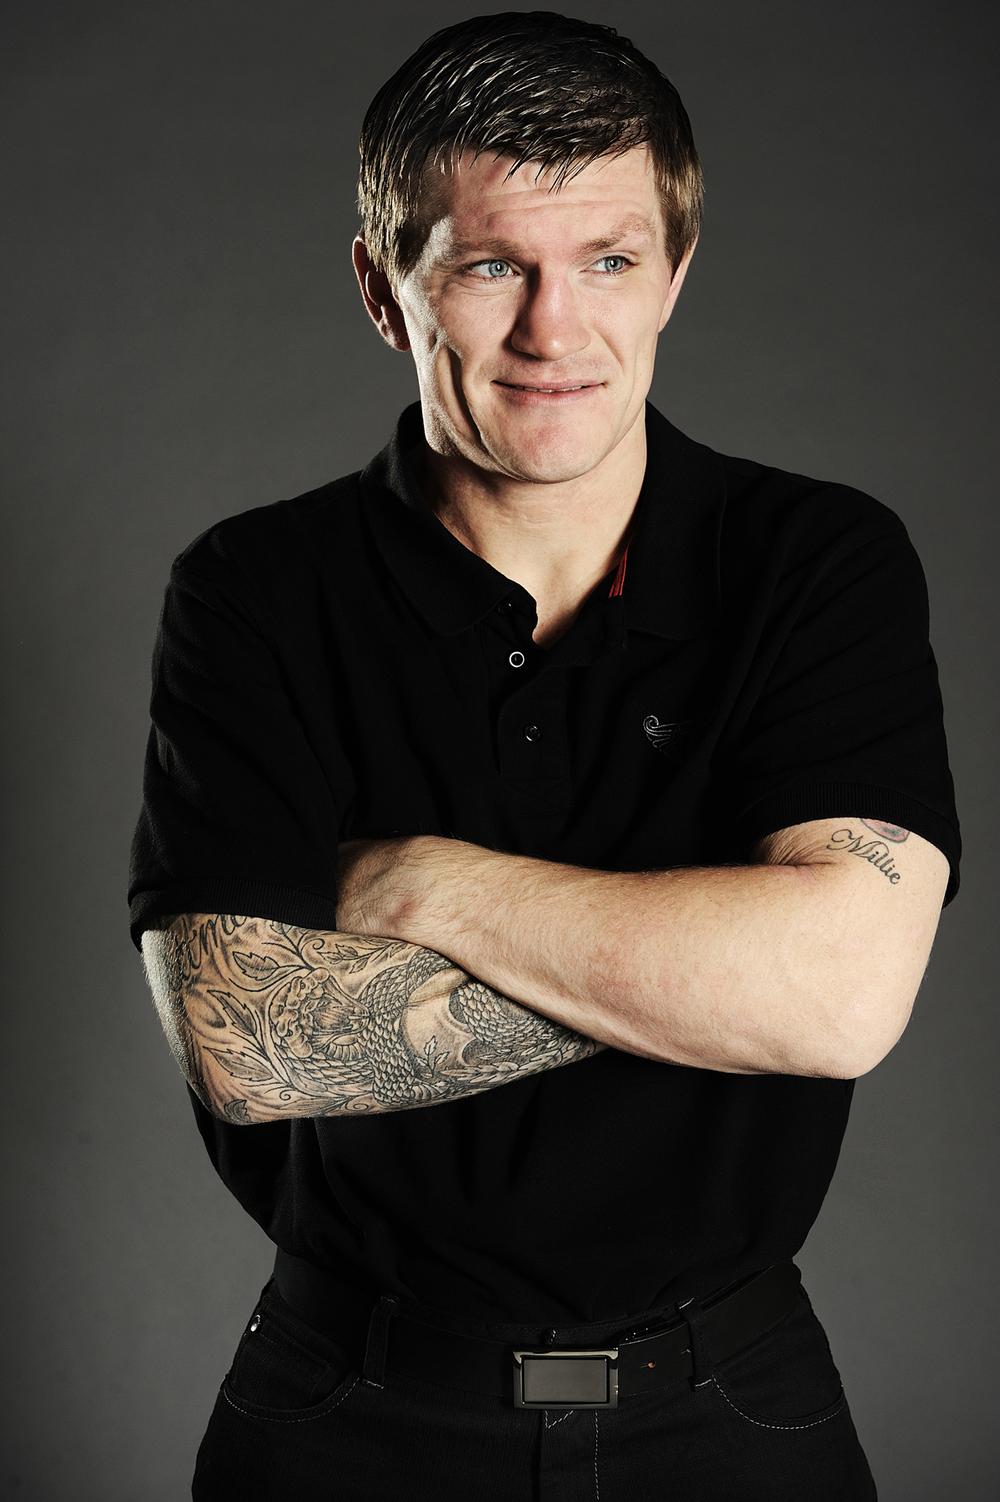 Four time world boxing champion Ricky Hatton will be on the live stage discussing The Hatton Academy